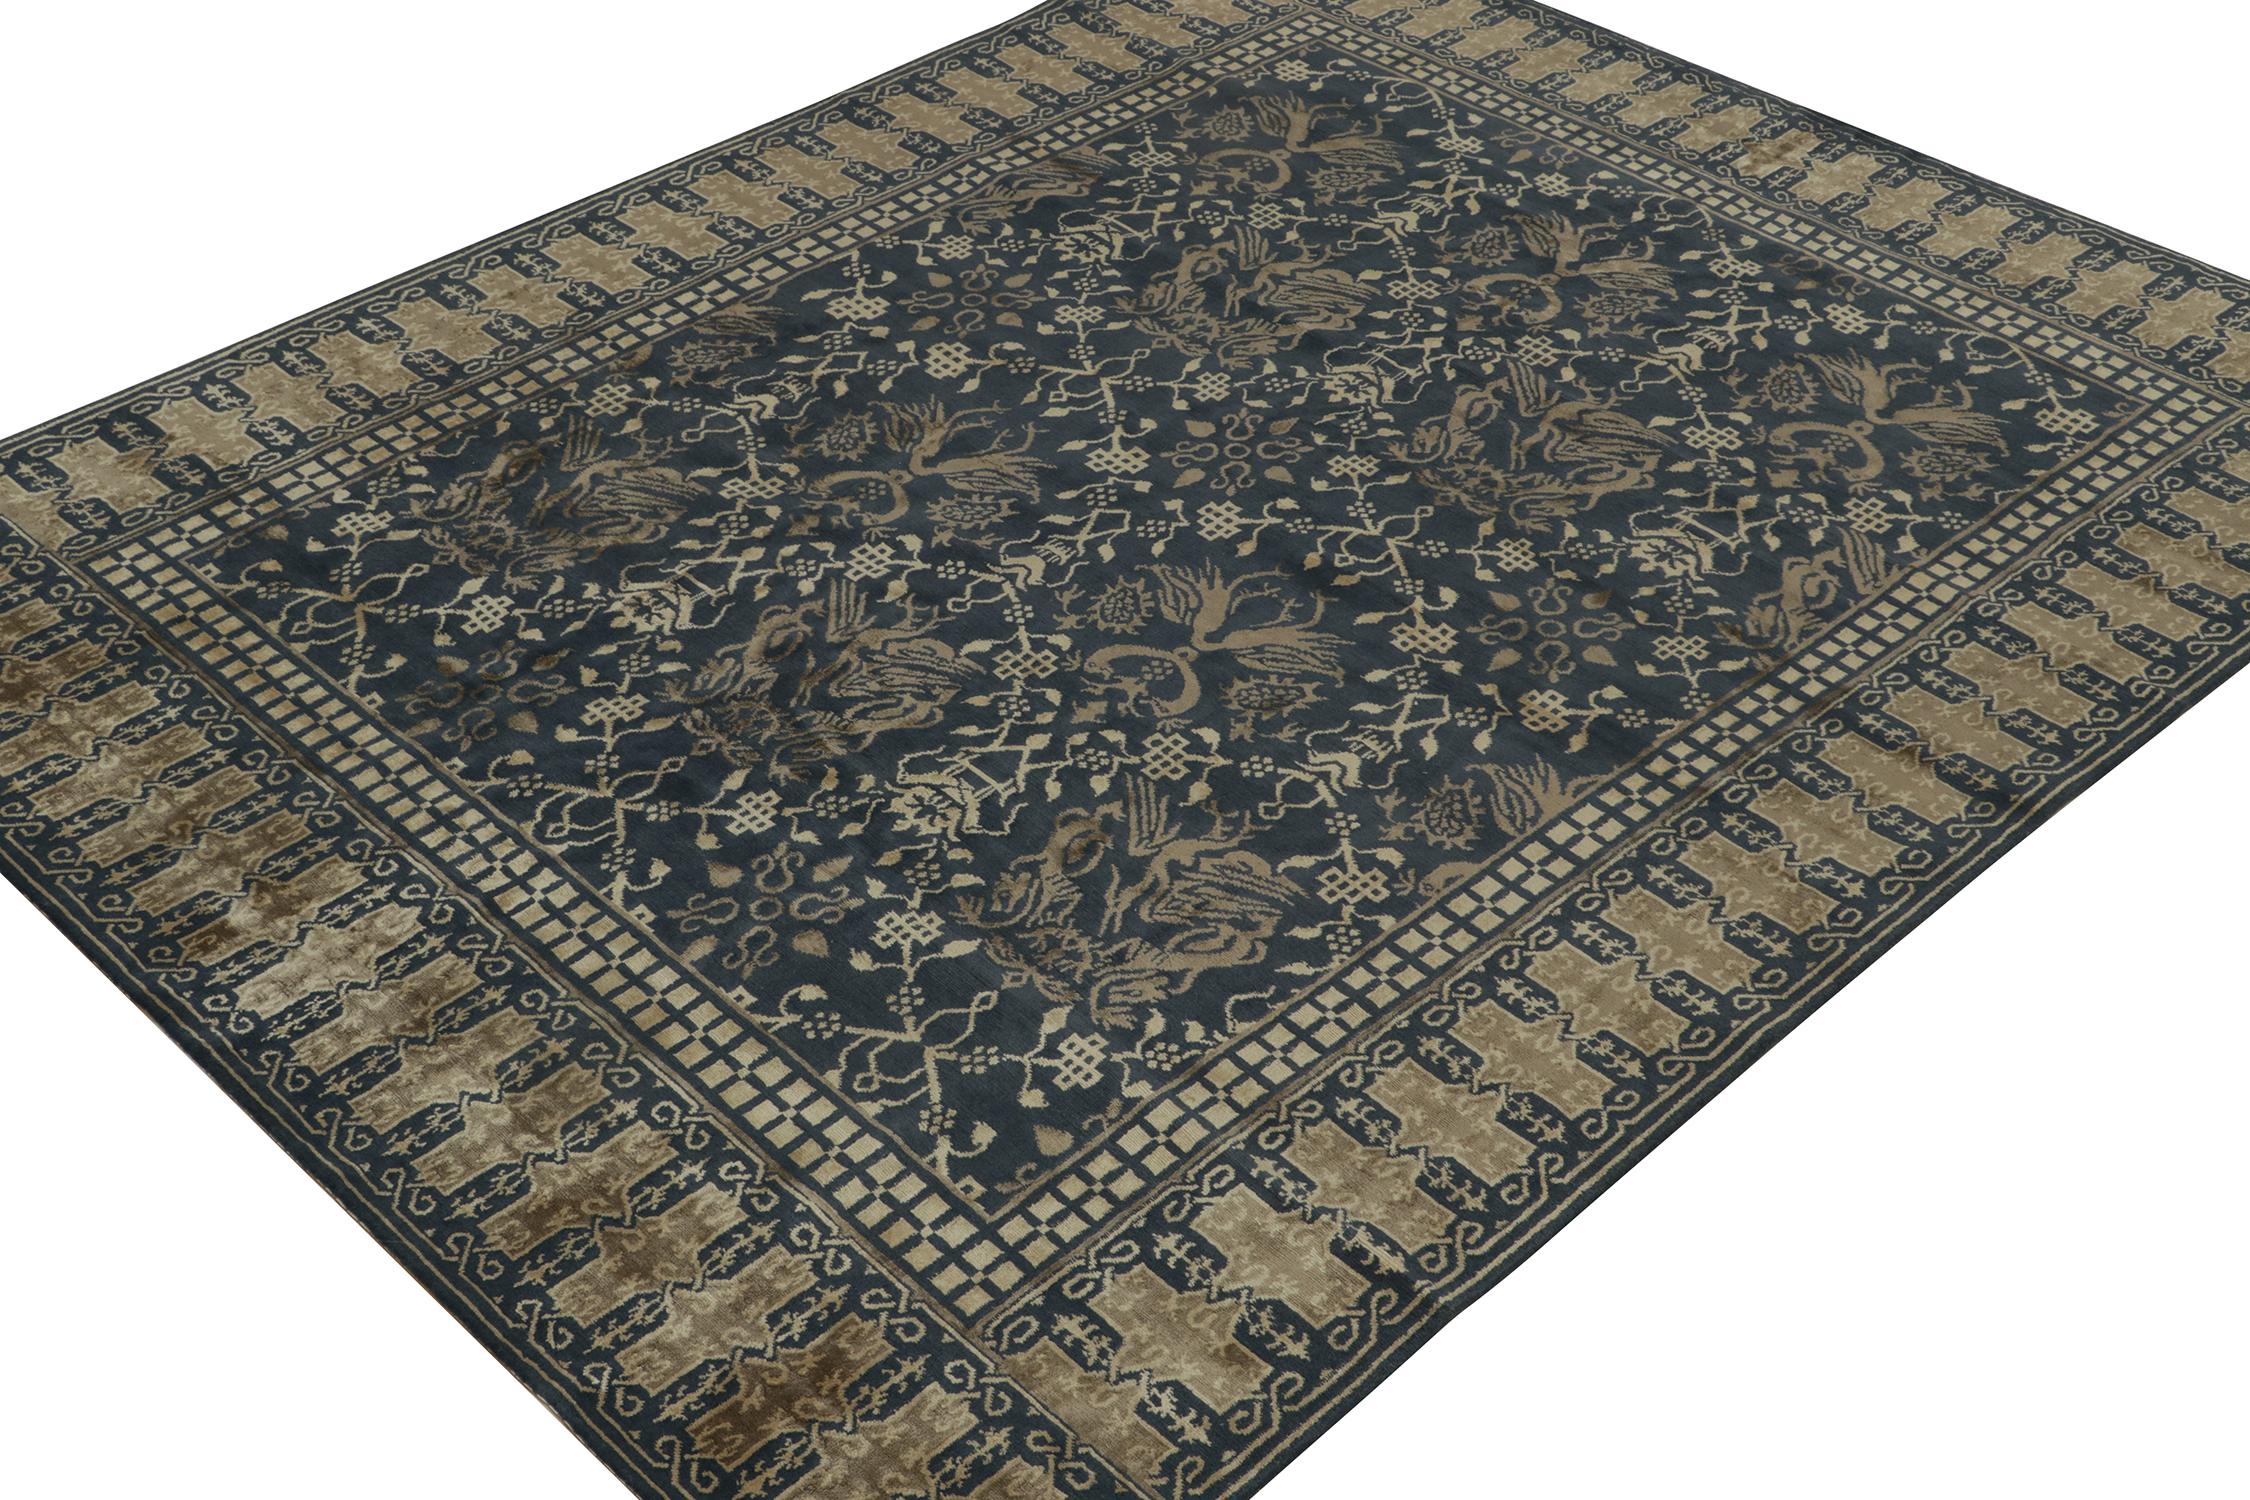 This 8x10 rug is a new addition to Rug & Kilim's European Collection,  inspired by antique interpretations of Oriental dragon rugs.  Its hand-knotted wool and silk blend plays bronze with beige notes on navy blue.

Further On the Design:

Keen eyes